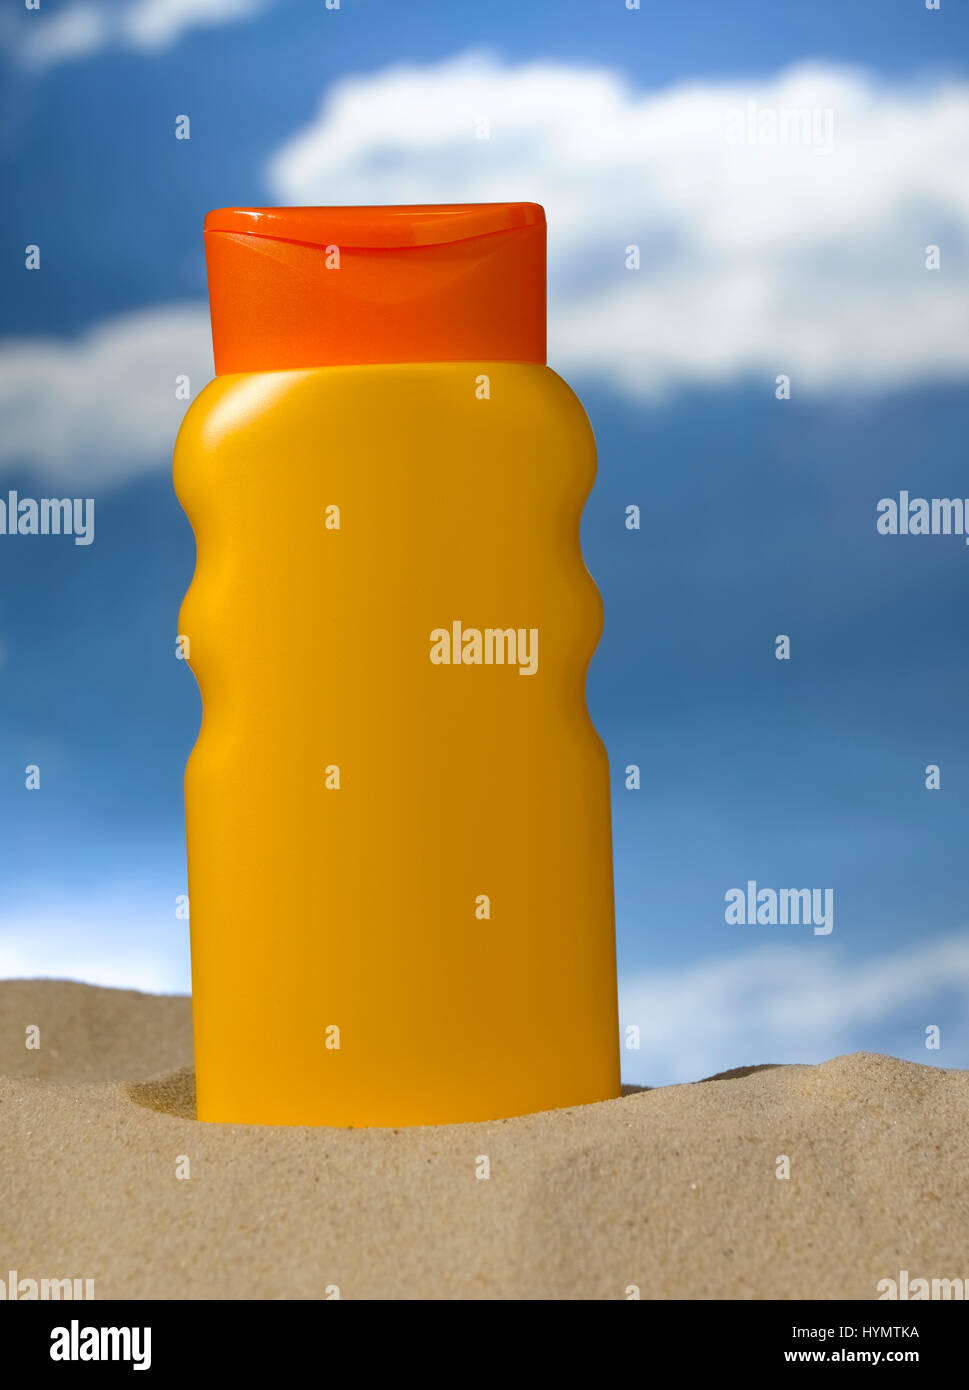 Lotion bottle on a beach Stock Photo